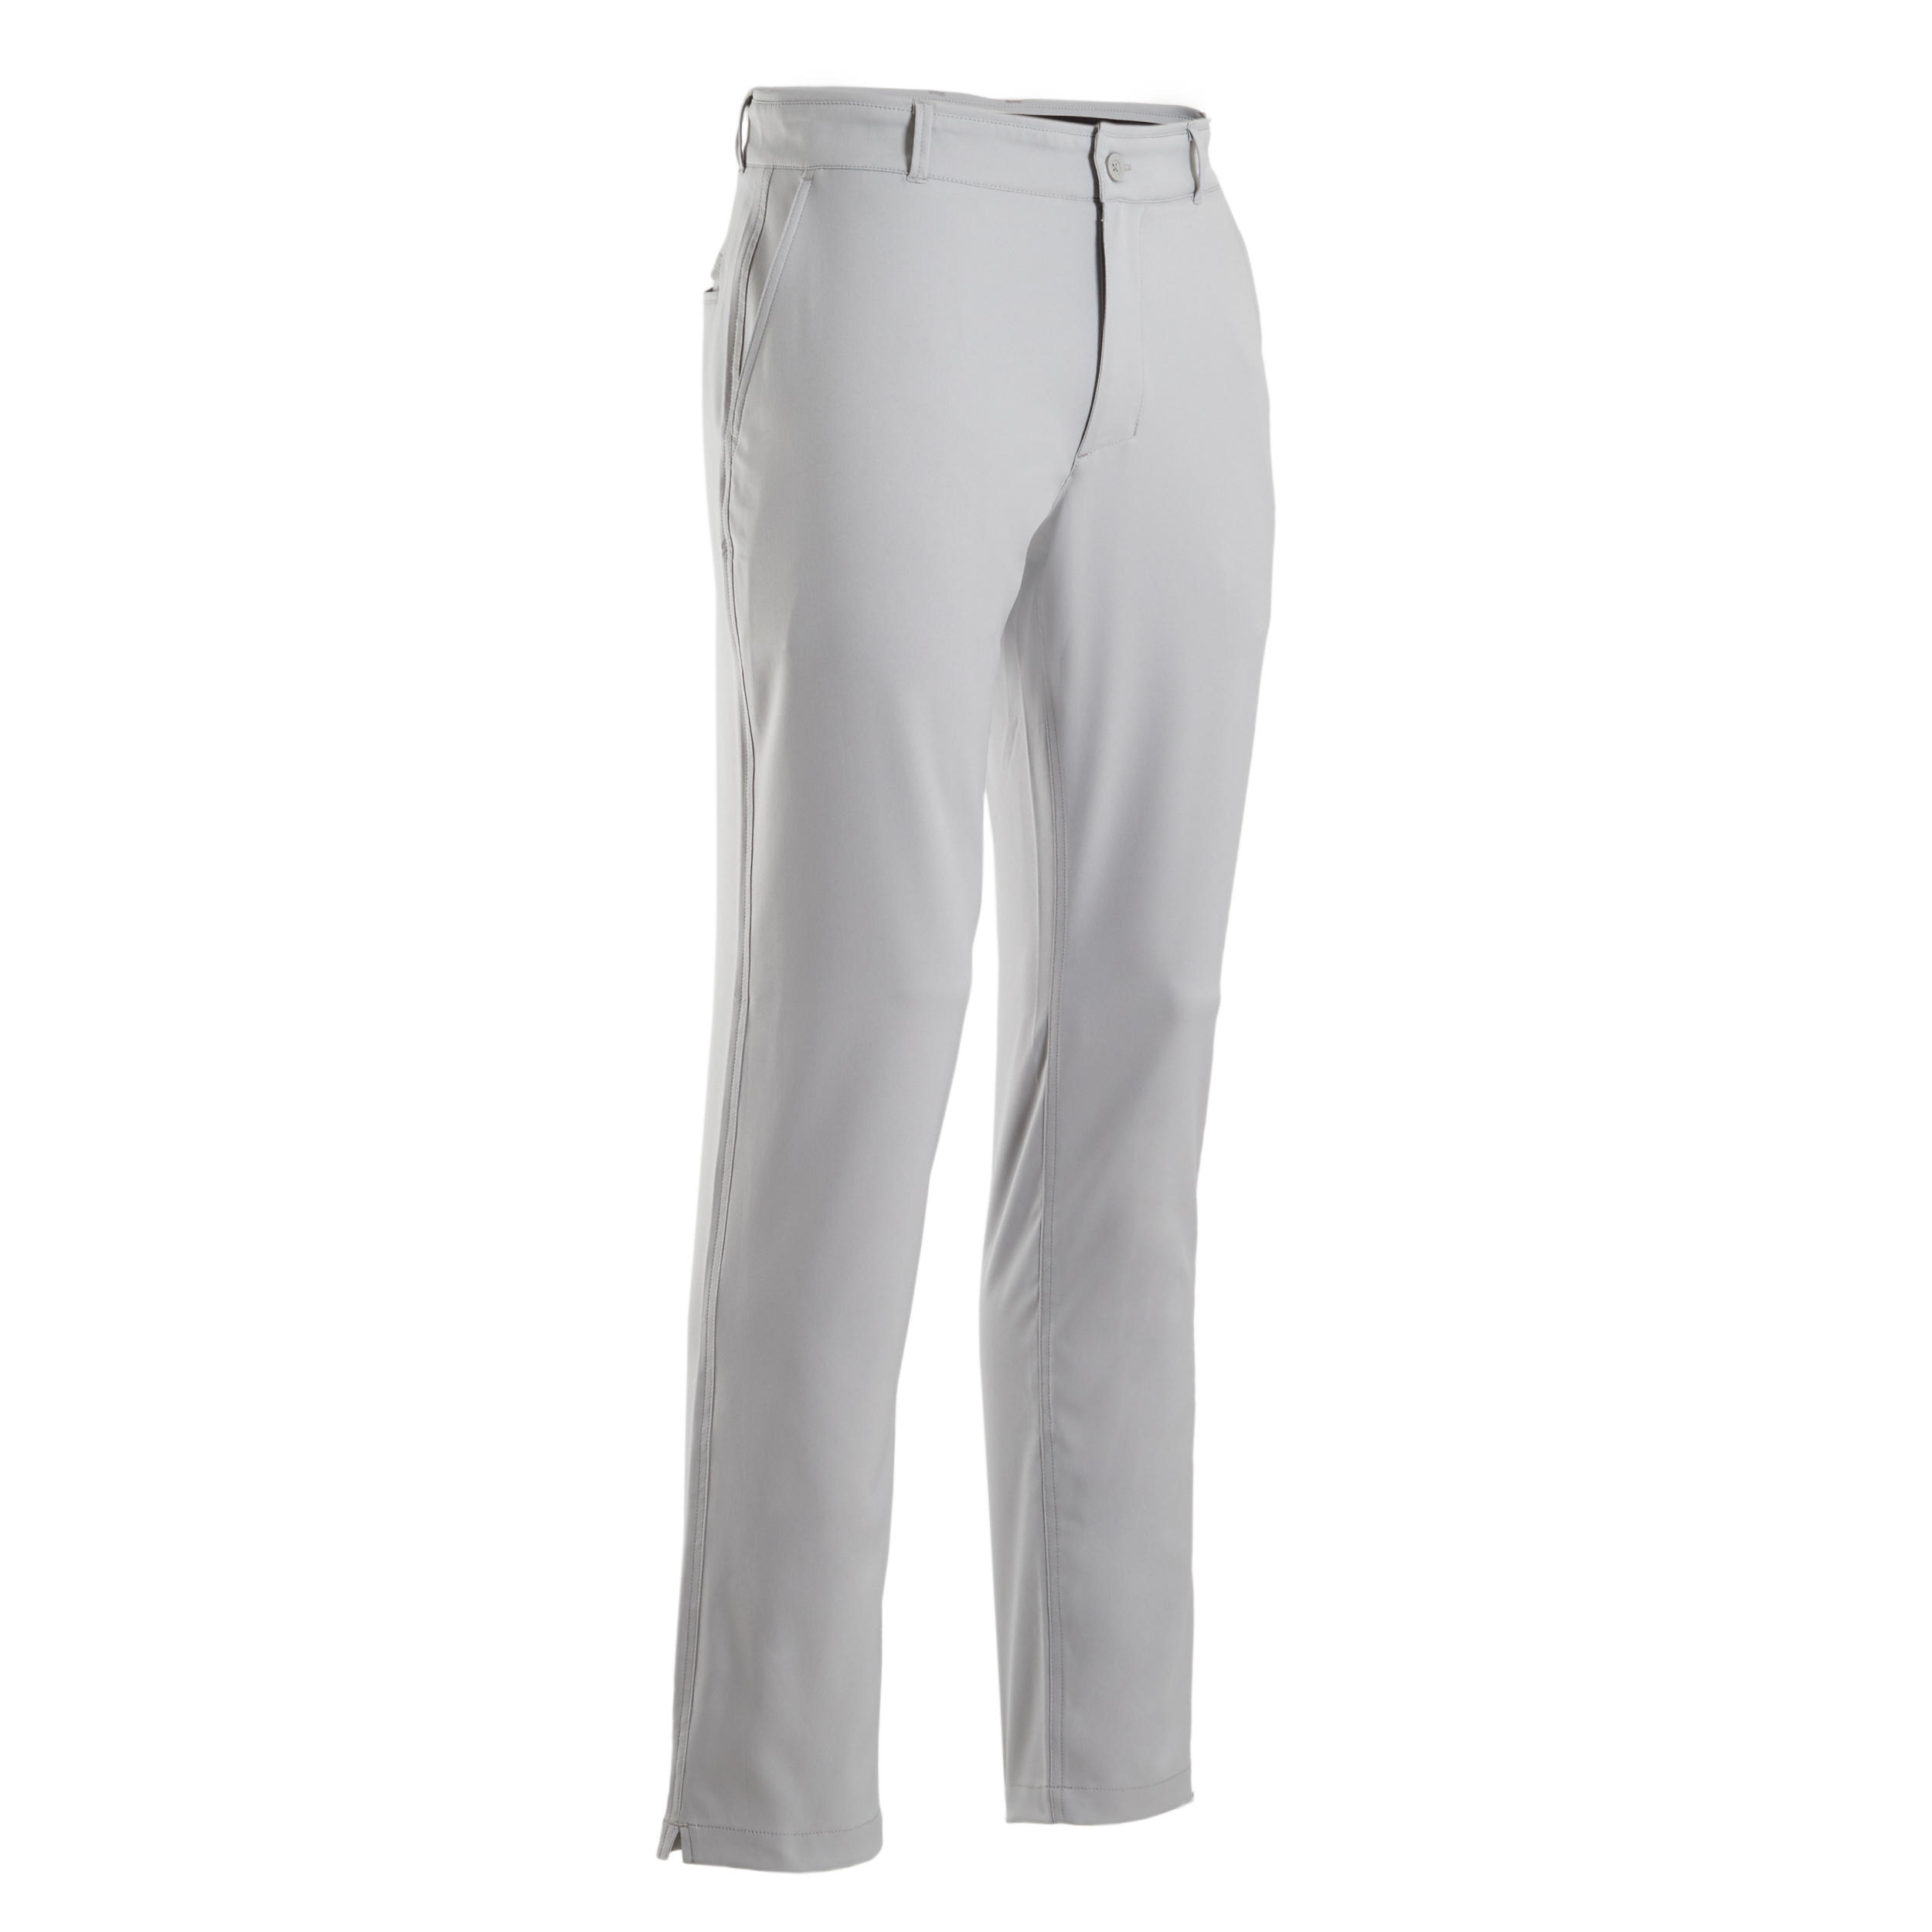 MEN'S BREATHABLE GOLF TROUSERS INESIS 